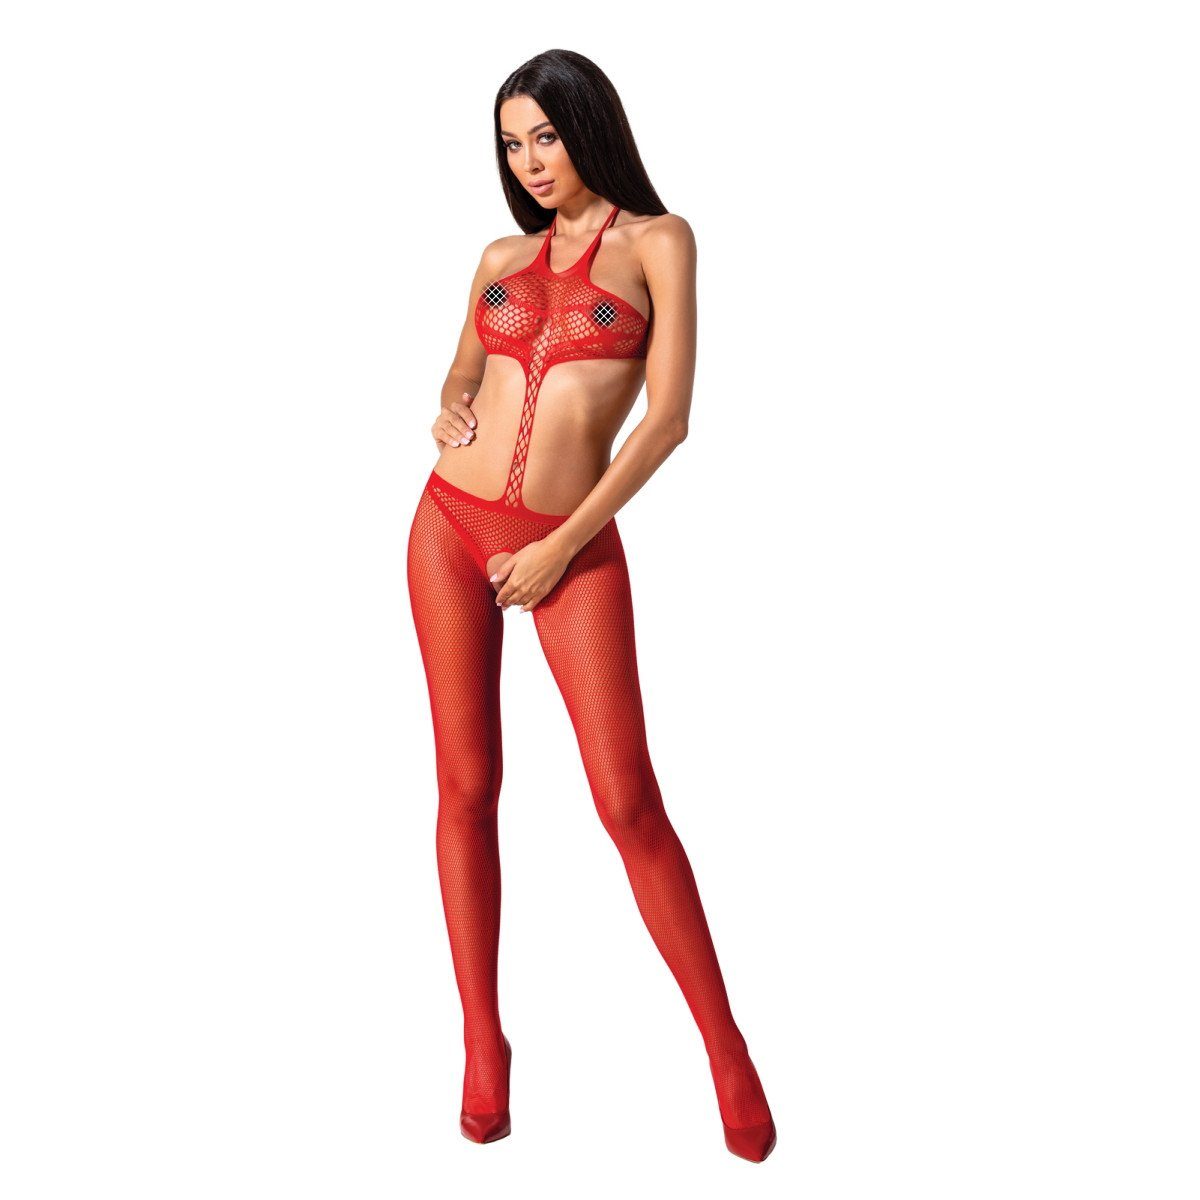 BS080 Bodystocking Passion-Exklusiv - (S/L) red Catsuit PE